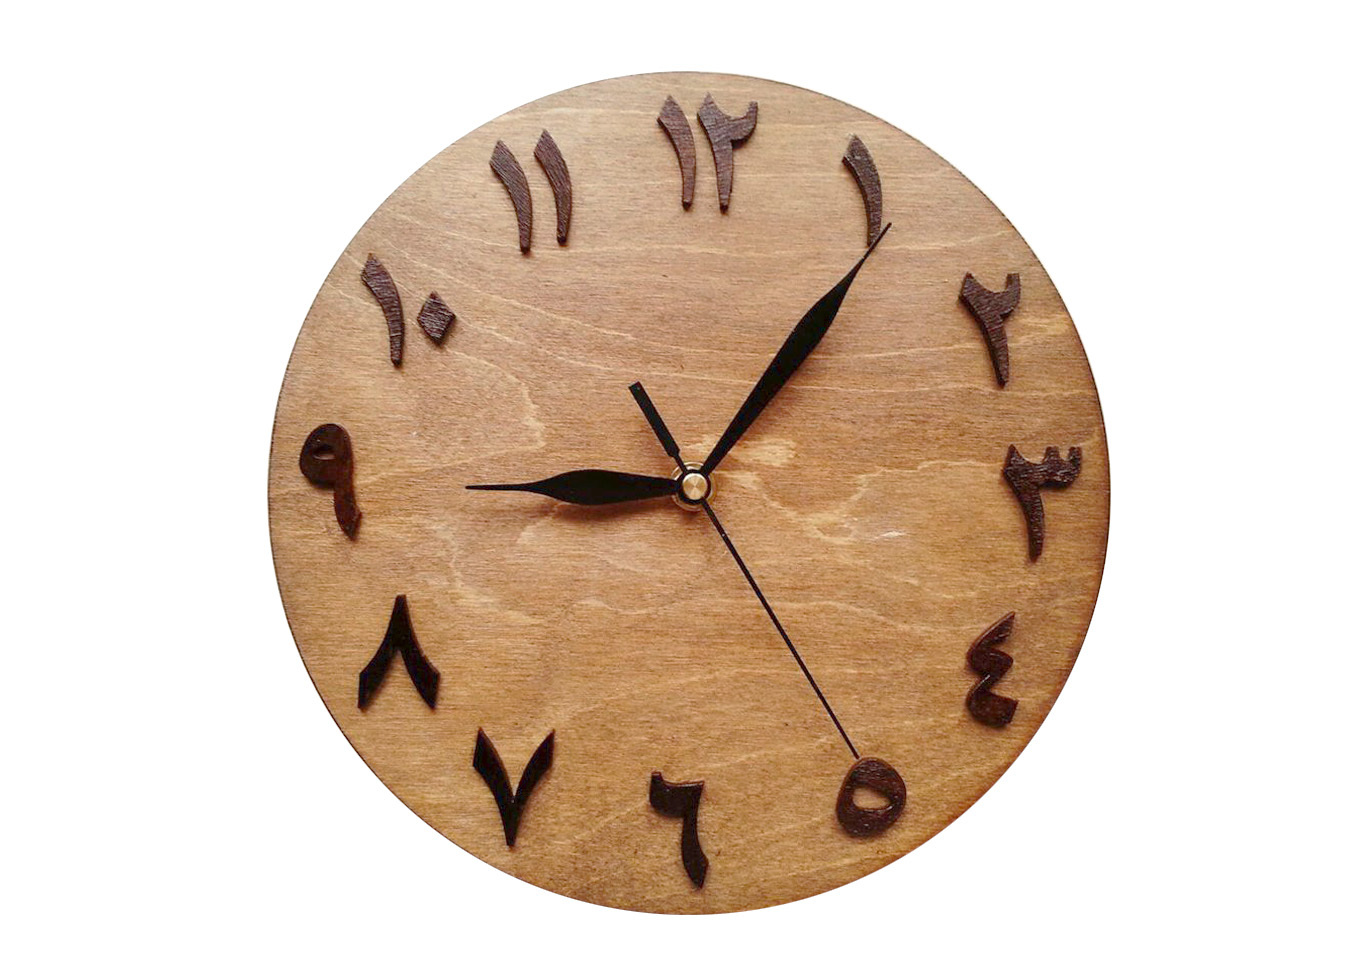 Clock arabic style (wooden) - different colors, size 30 cm (11.81 inches) - $22.00